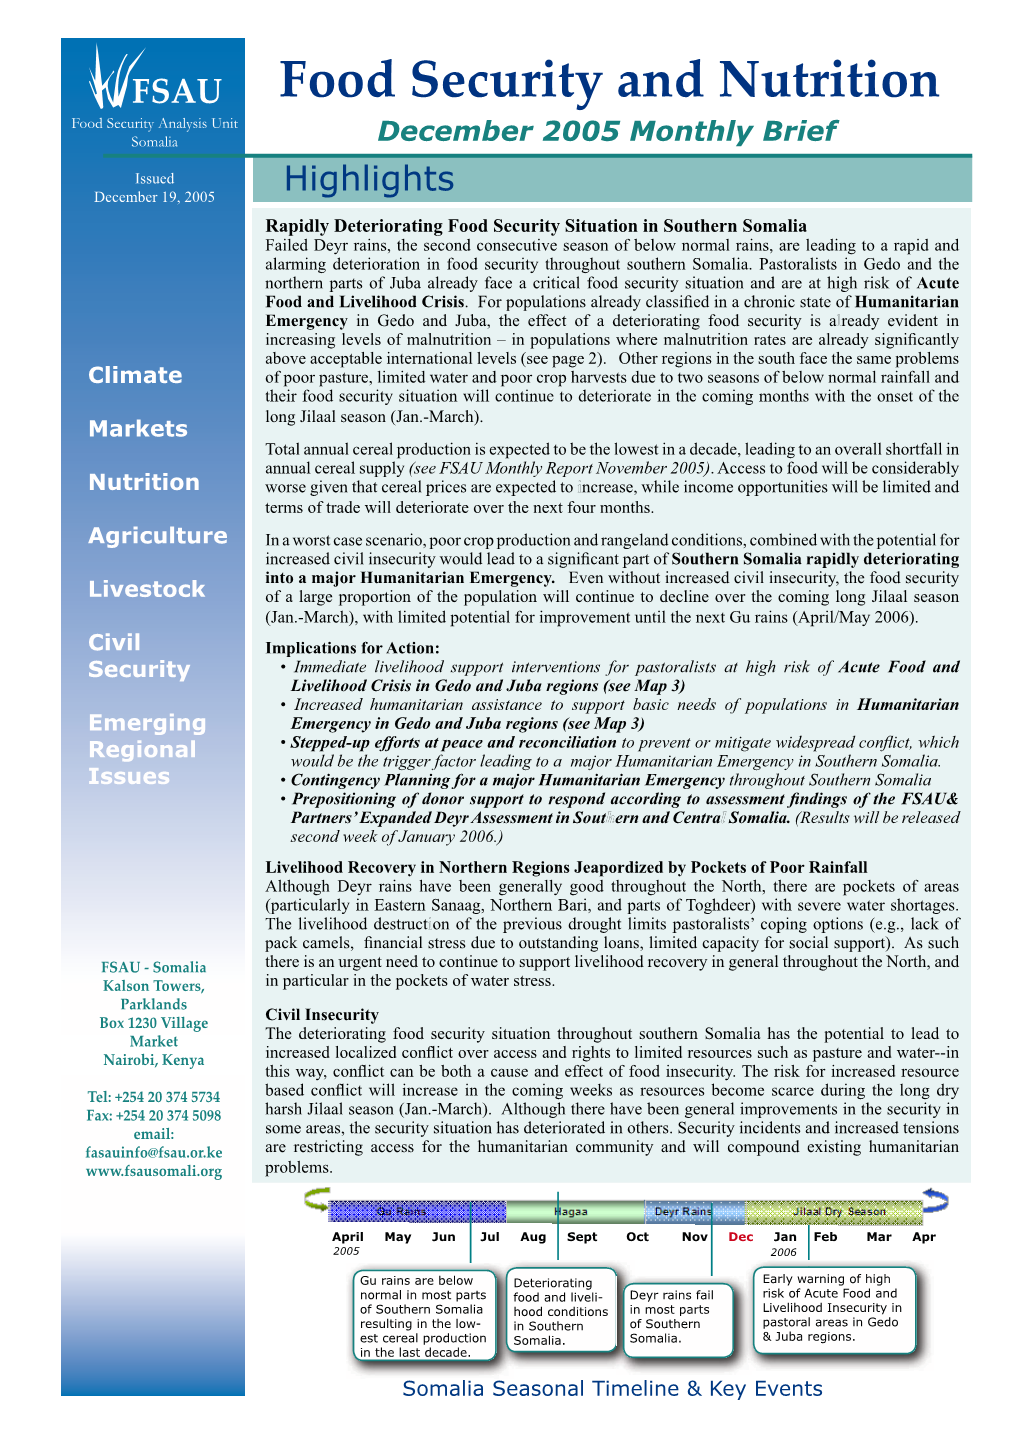 Food Security & Nutrition December 2005 Monthly Brief